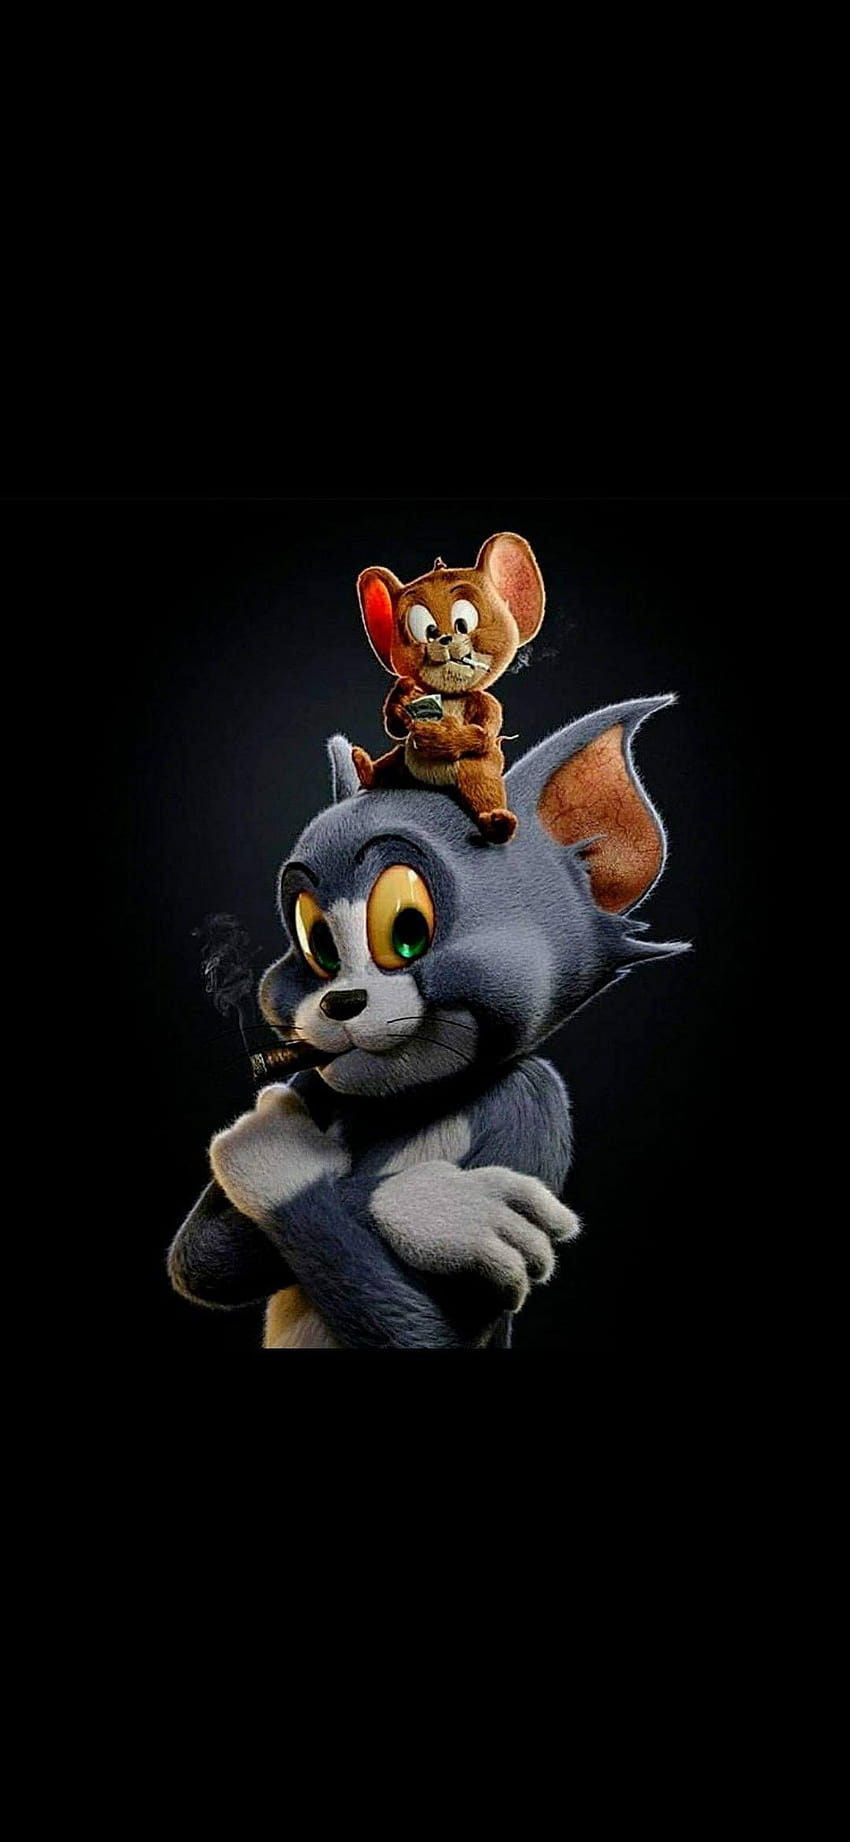 Pin on samsung s, tom and jerry black HD phone wallpaper